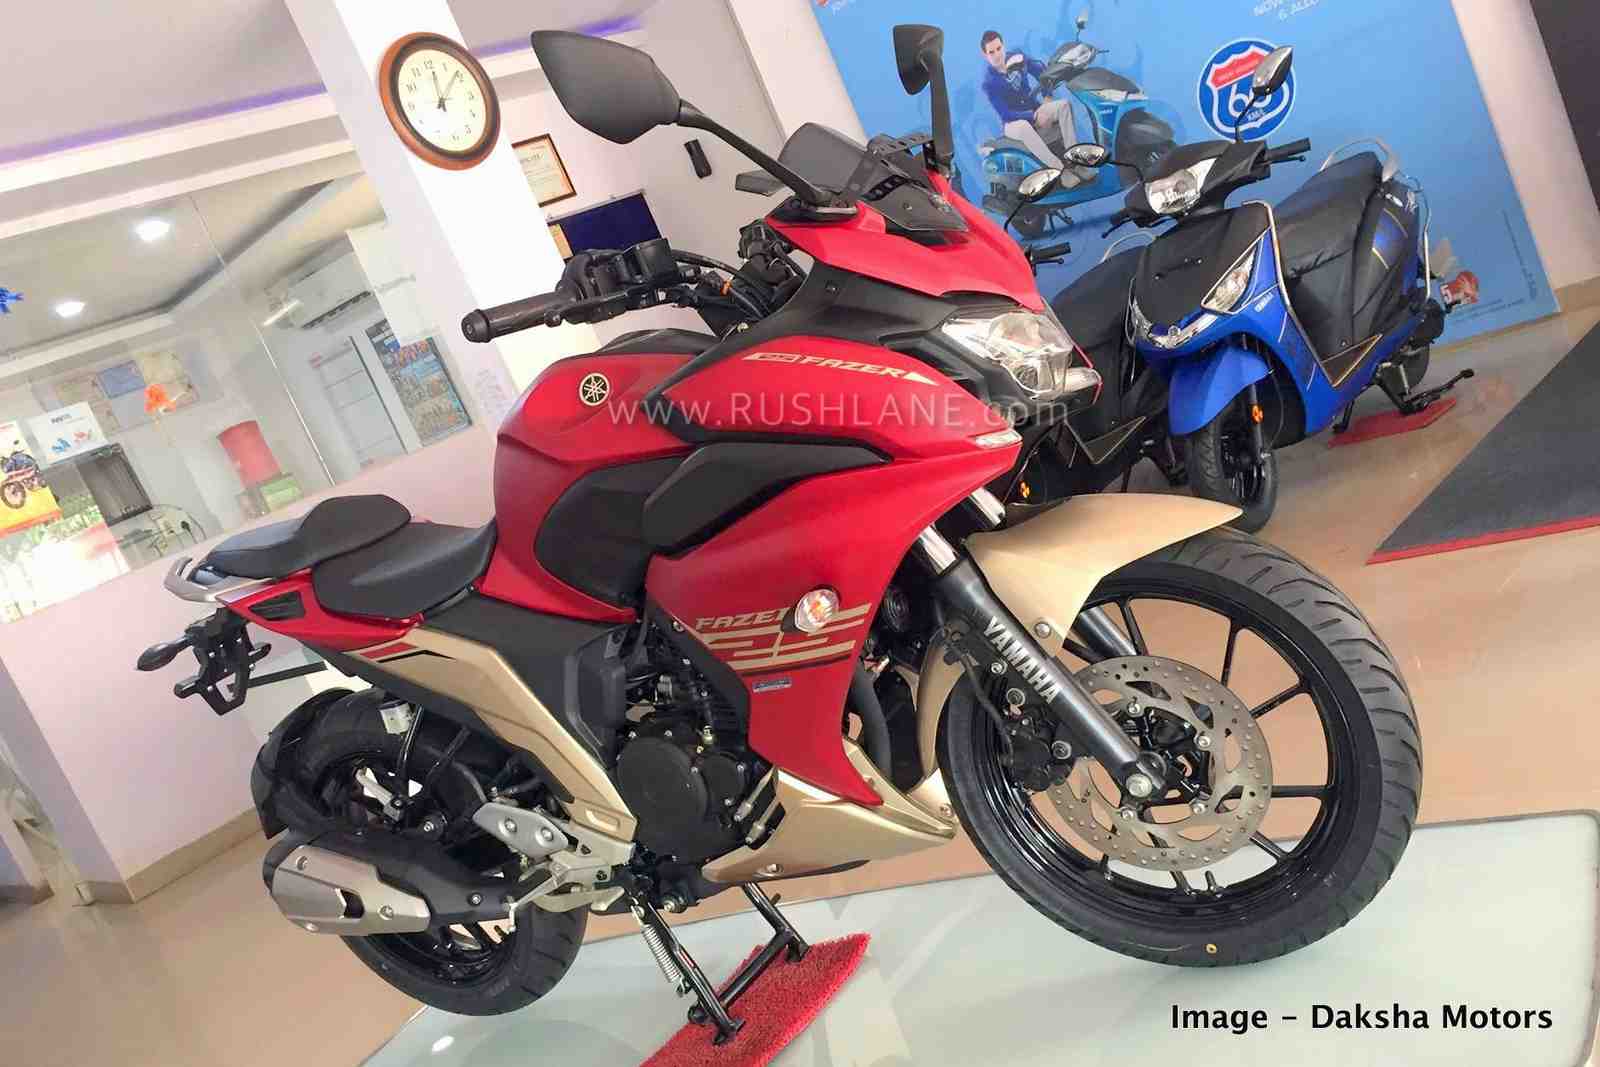 Yamaha Fazer 25, FZ 25 recalled in India - Over 13,000 bikes affected